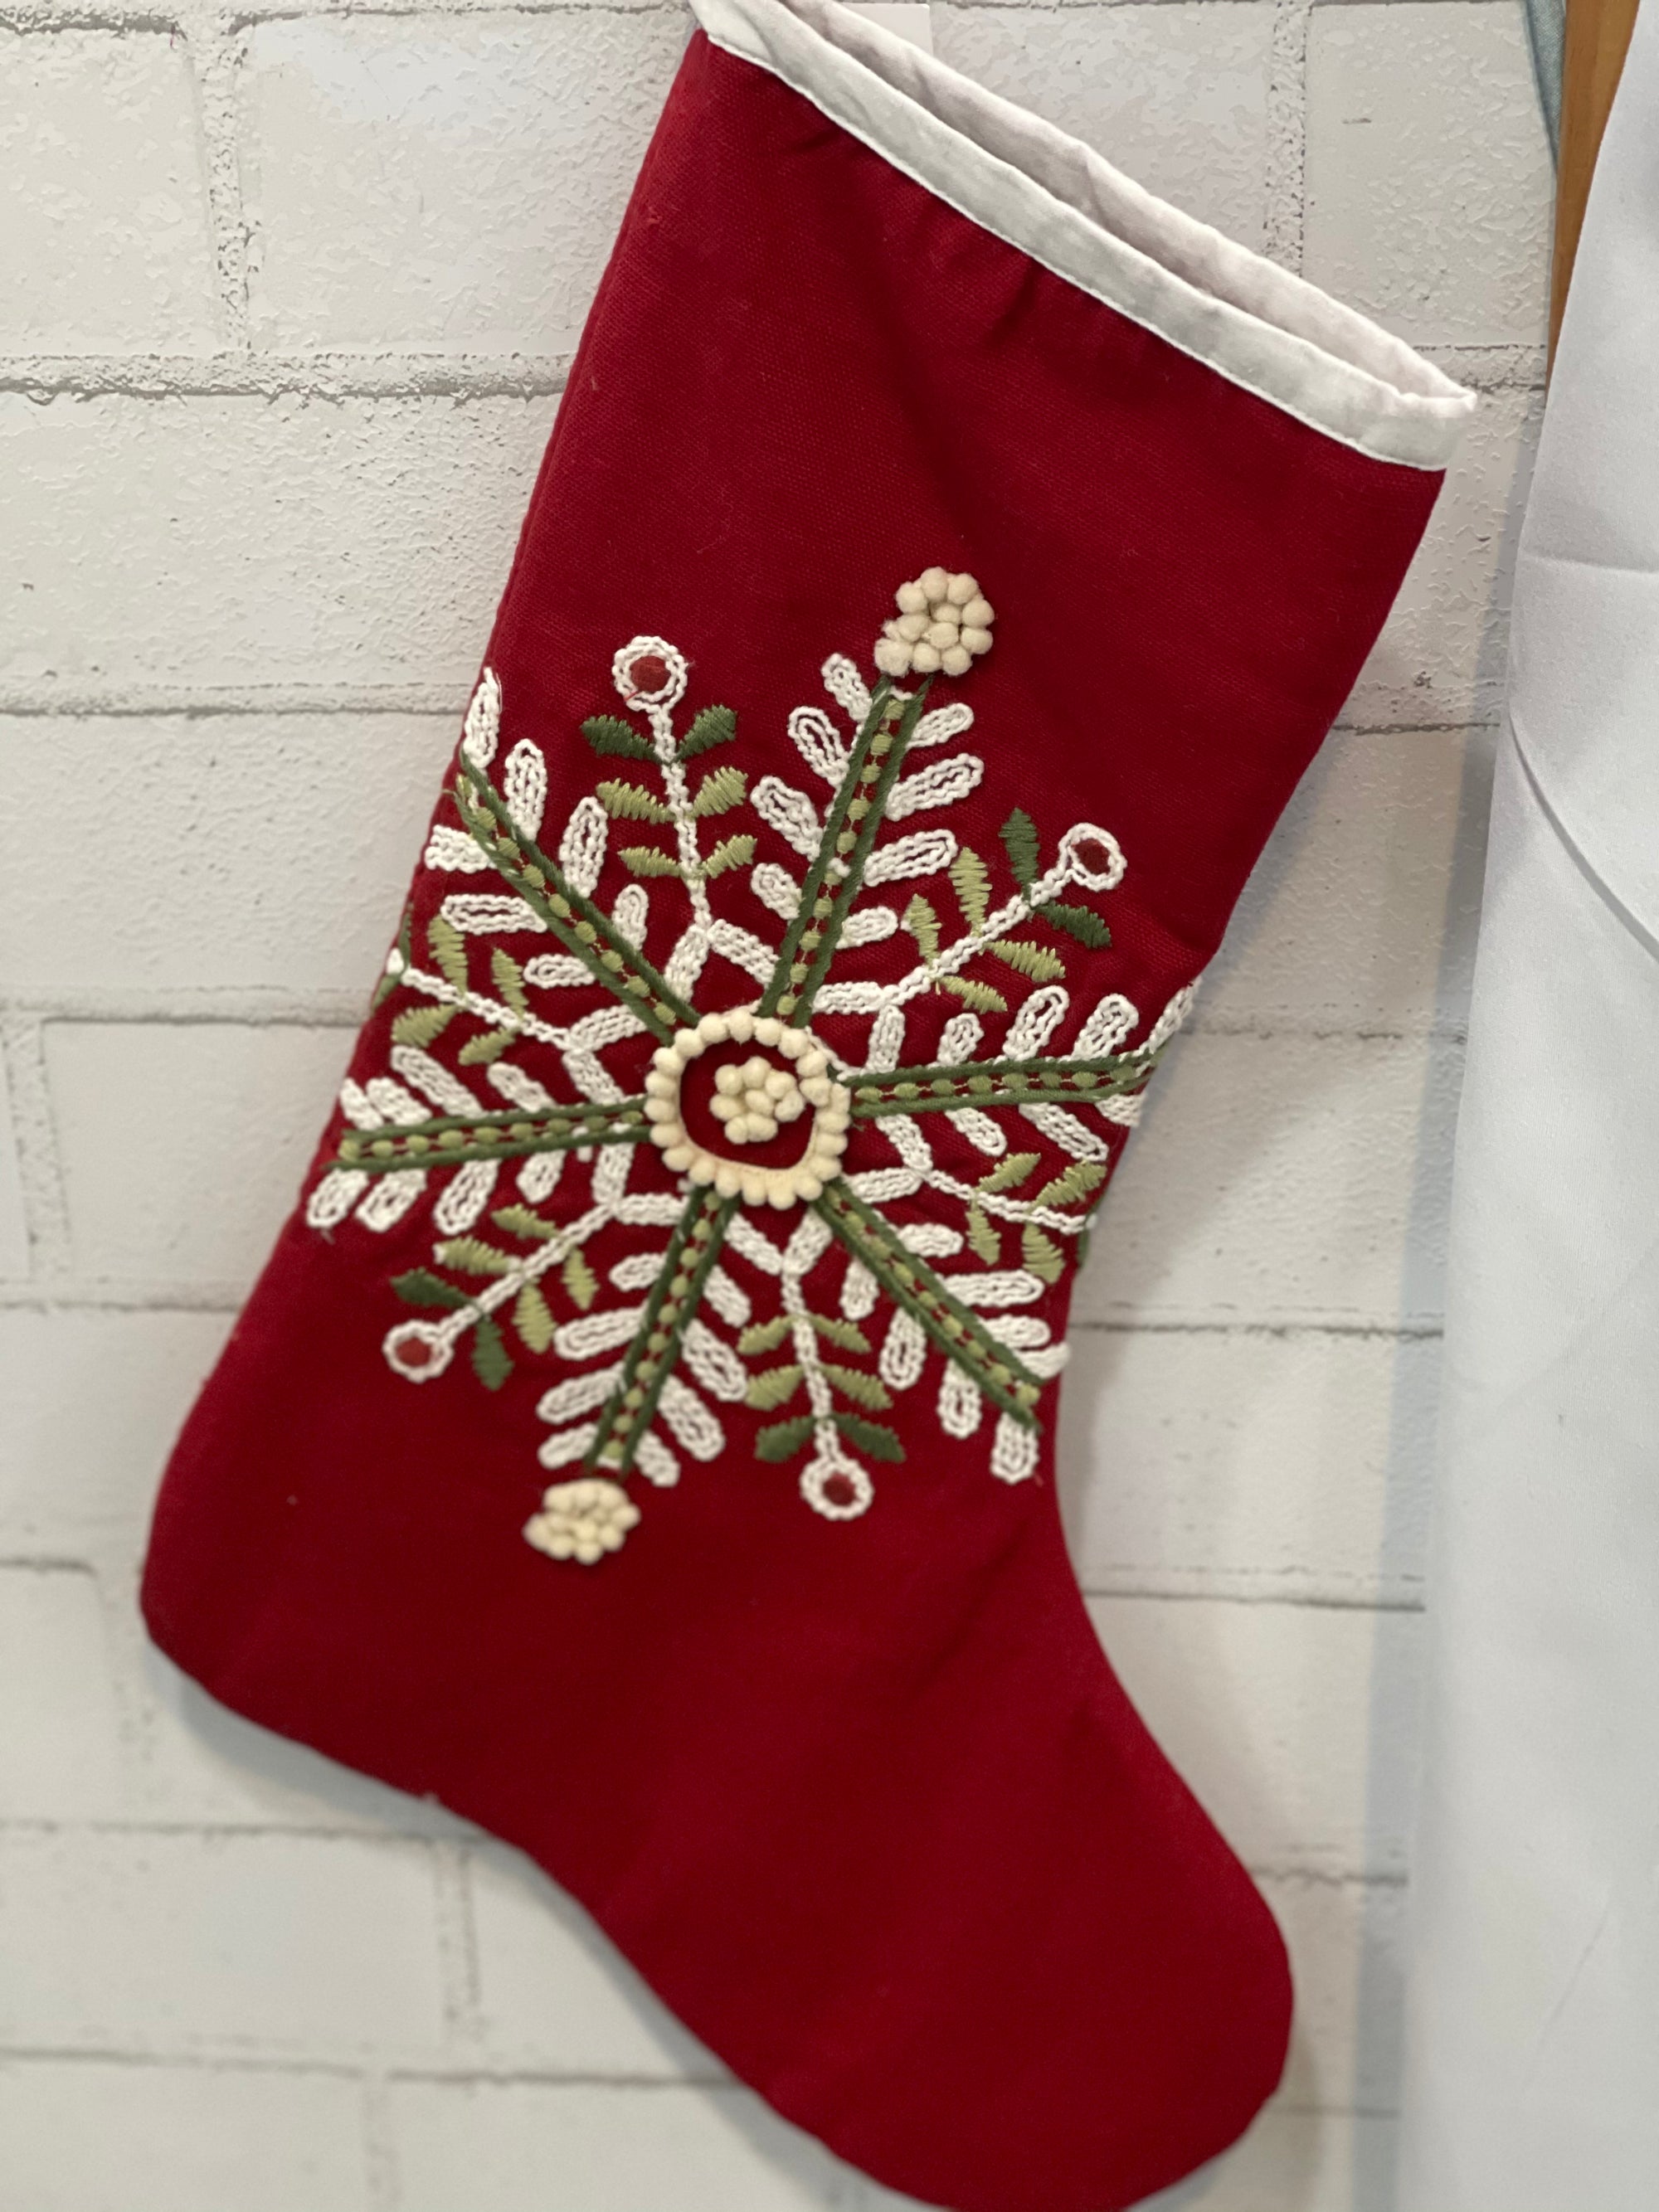 HOLIDAY STOCKING (love the picture, need to add more details before we publish.  MJ) - Molly's! A Chic and Unique Boutique 